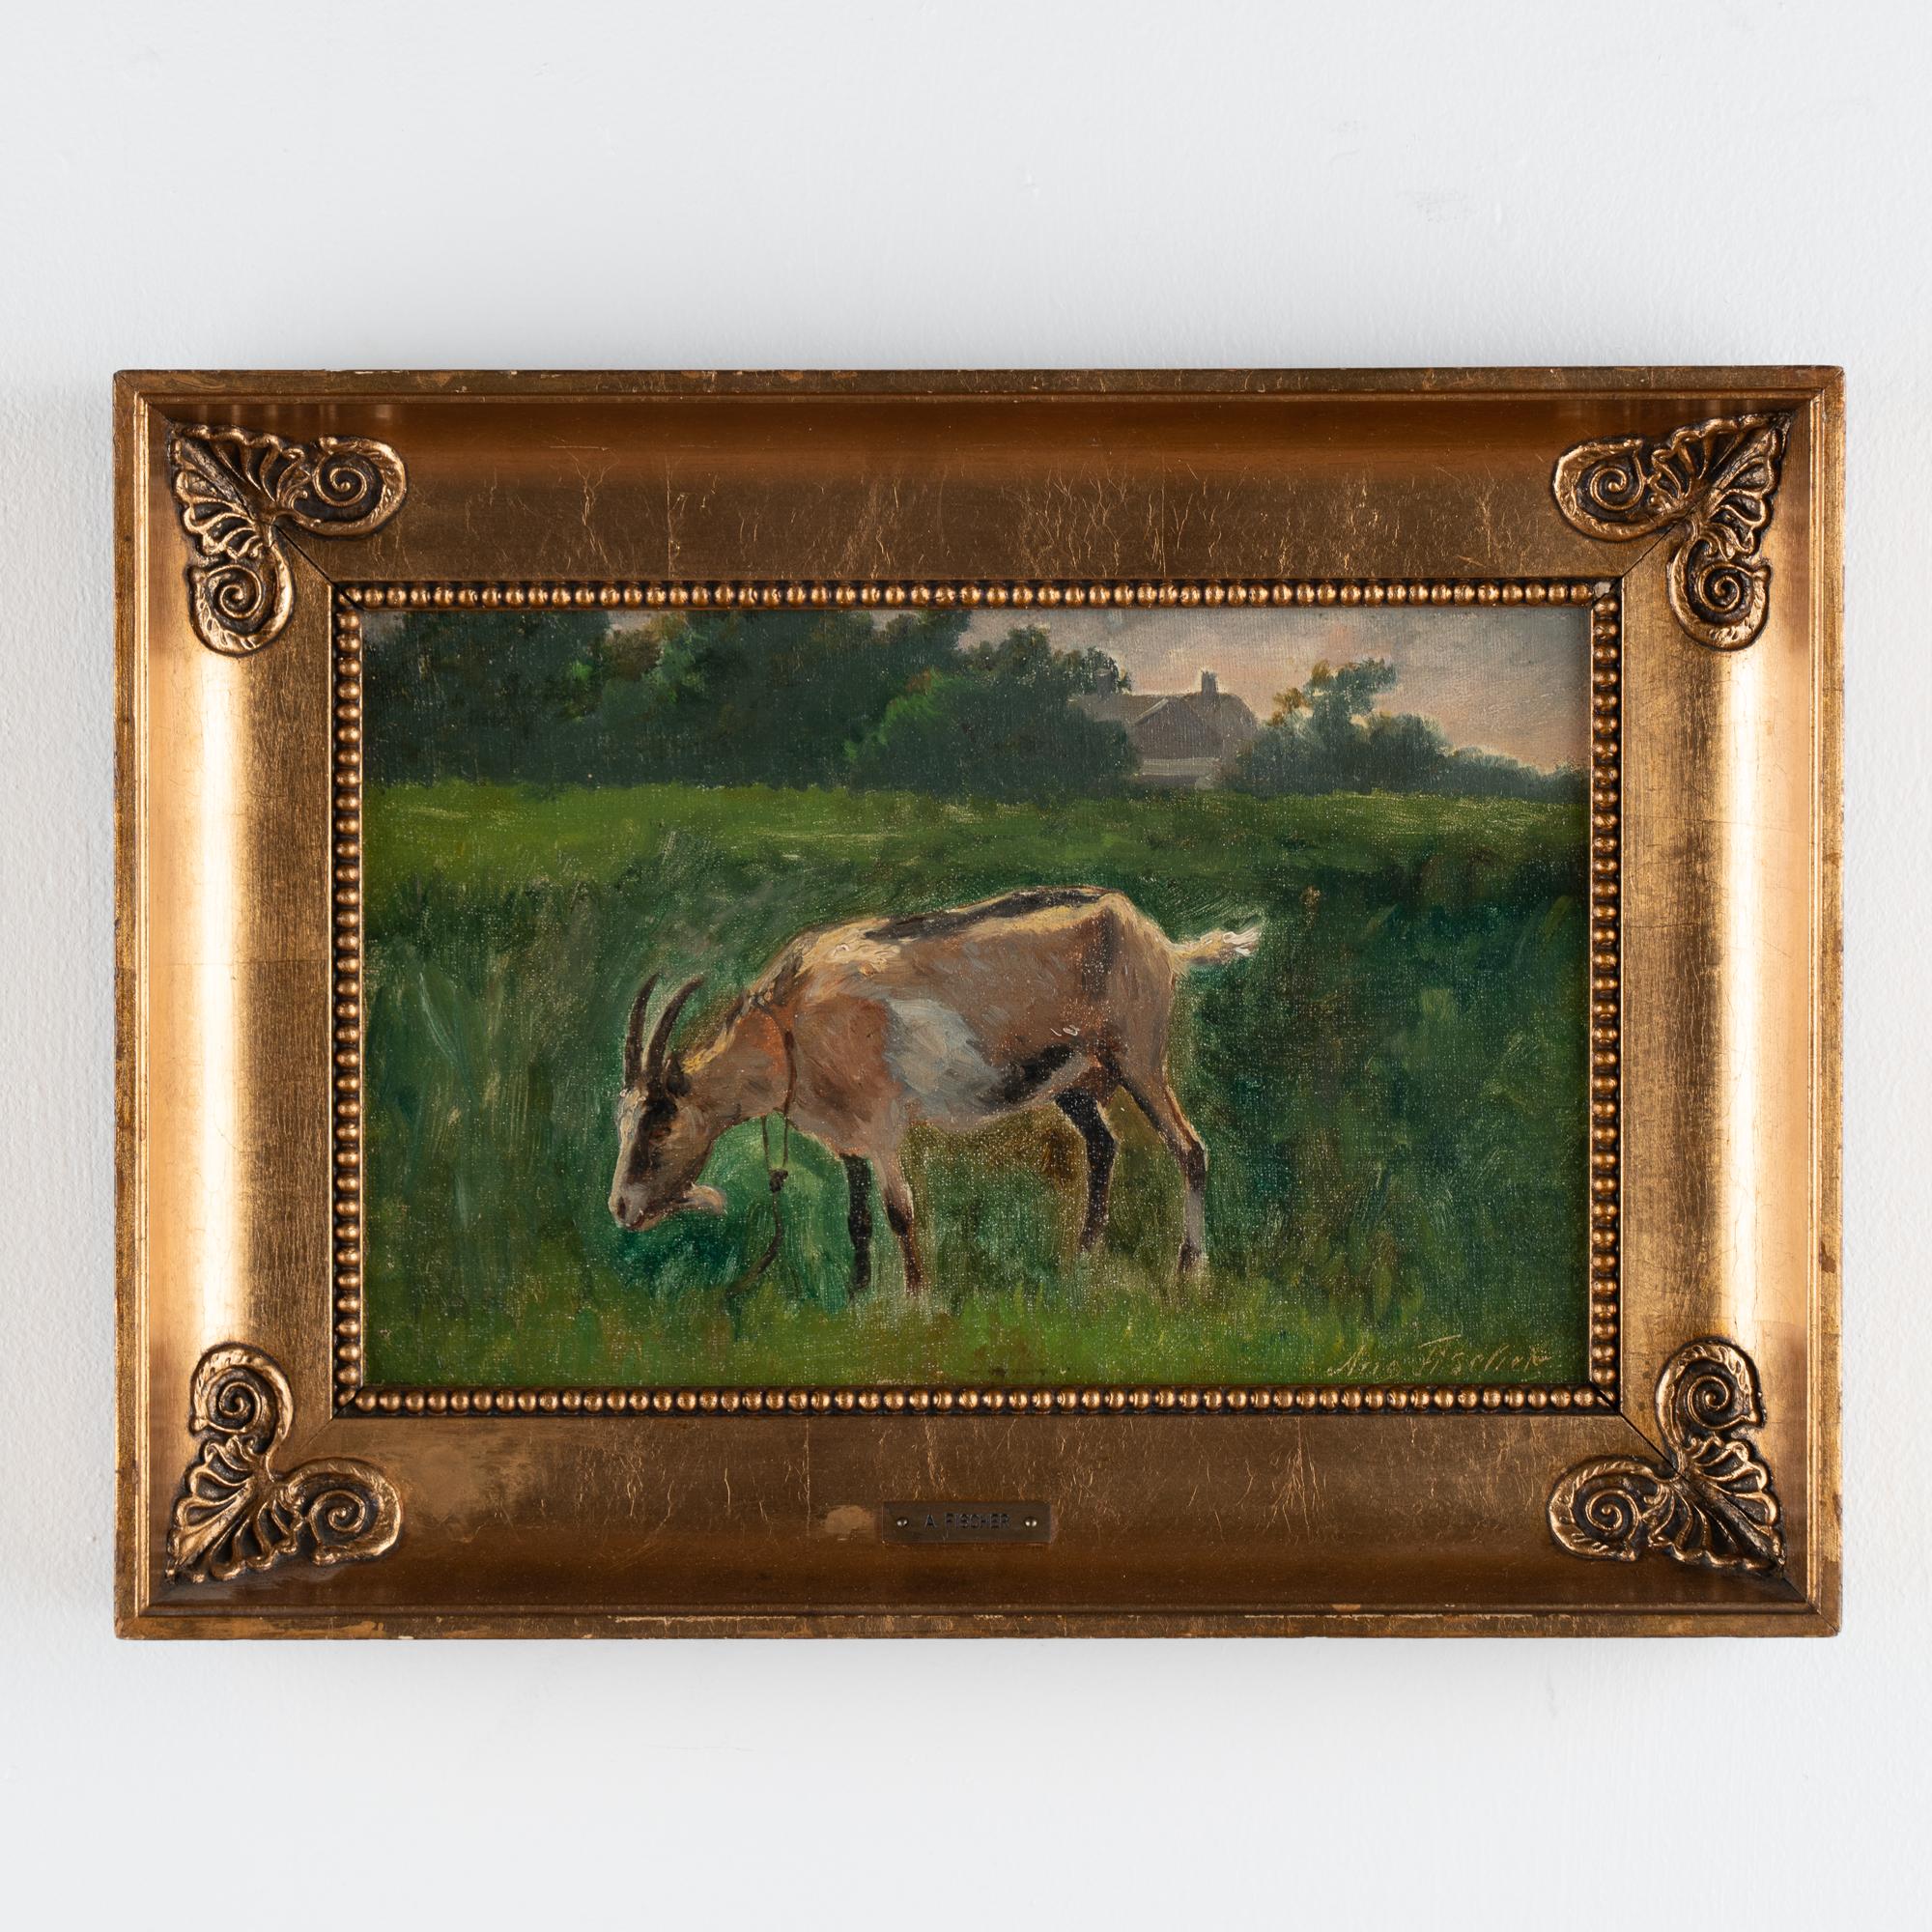 Original oil on canvas small painting of goat grazing in open field, signed.
Canvas is in good condition reflective of age.
Johannes August Fischer was a Danish landscape painter, brother of the famous Paul Fischer. In 1874, he made his painting